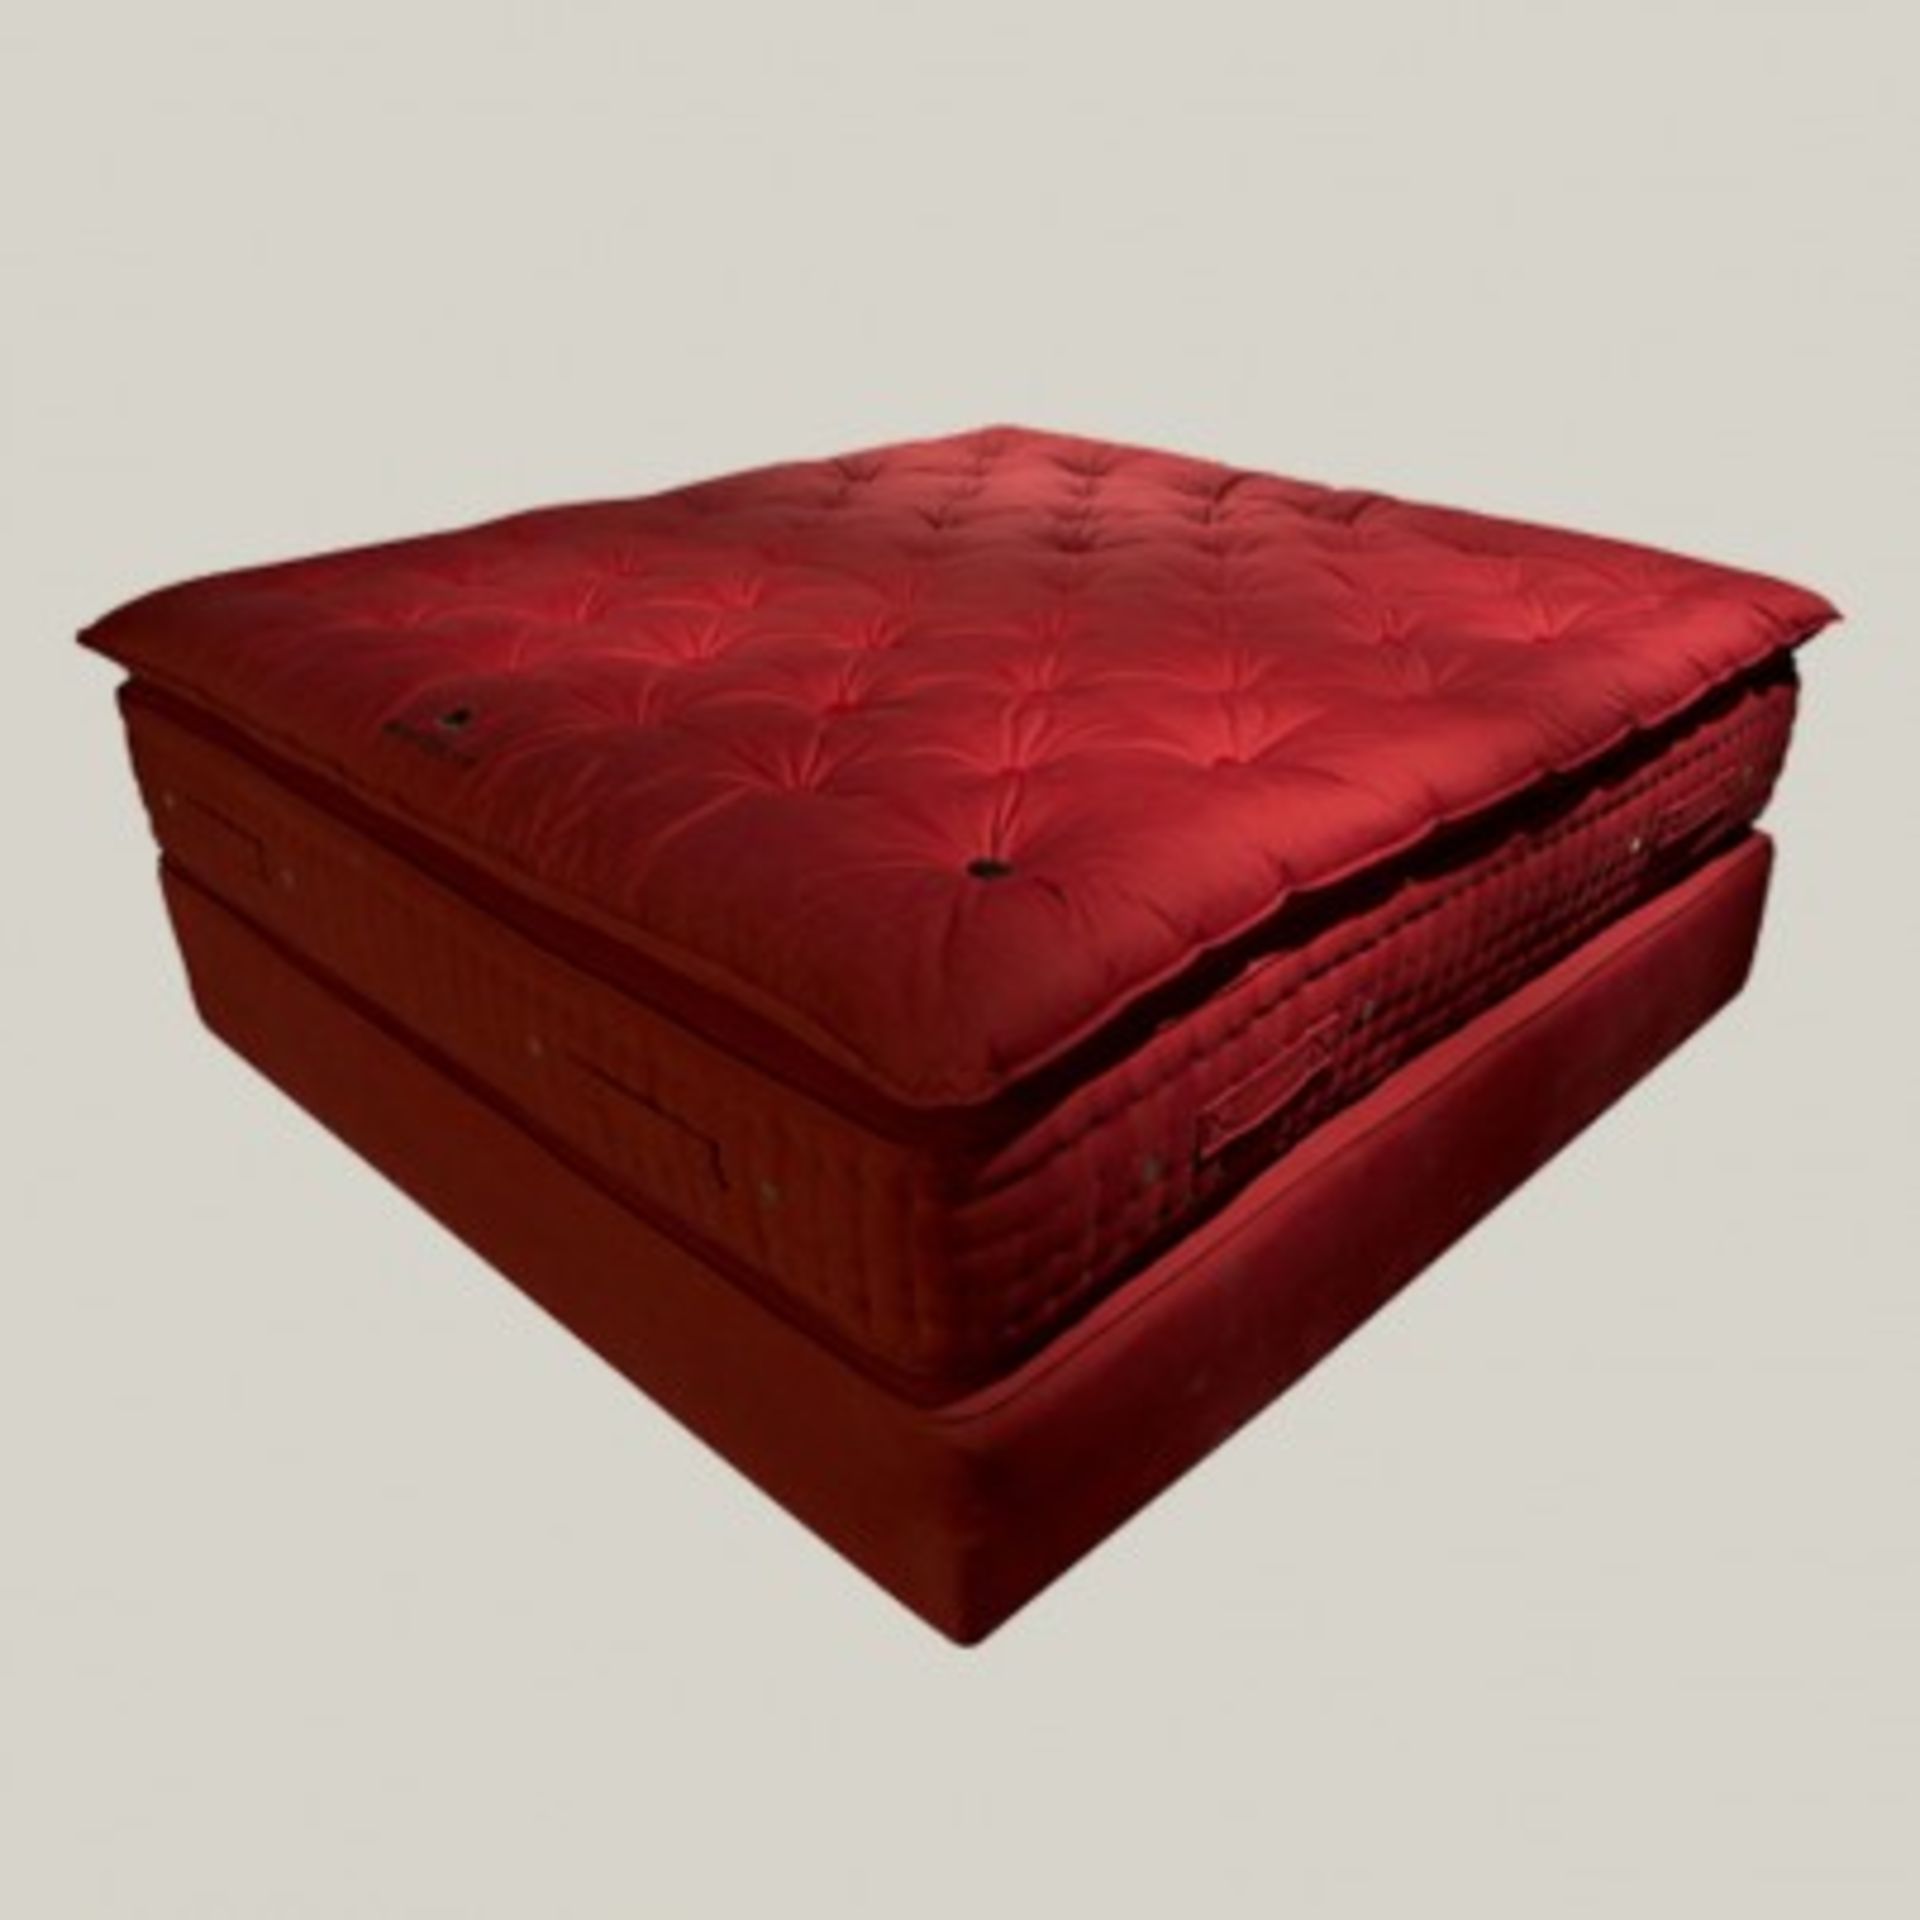 The Brigadier Divan UK The Most Popular Bed Of The Perpetual Collection The Brigadier Is Designed